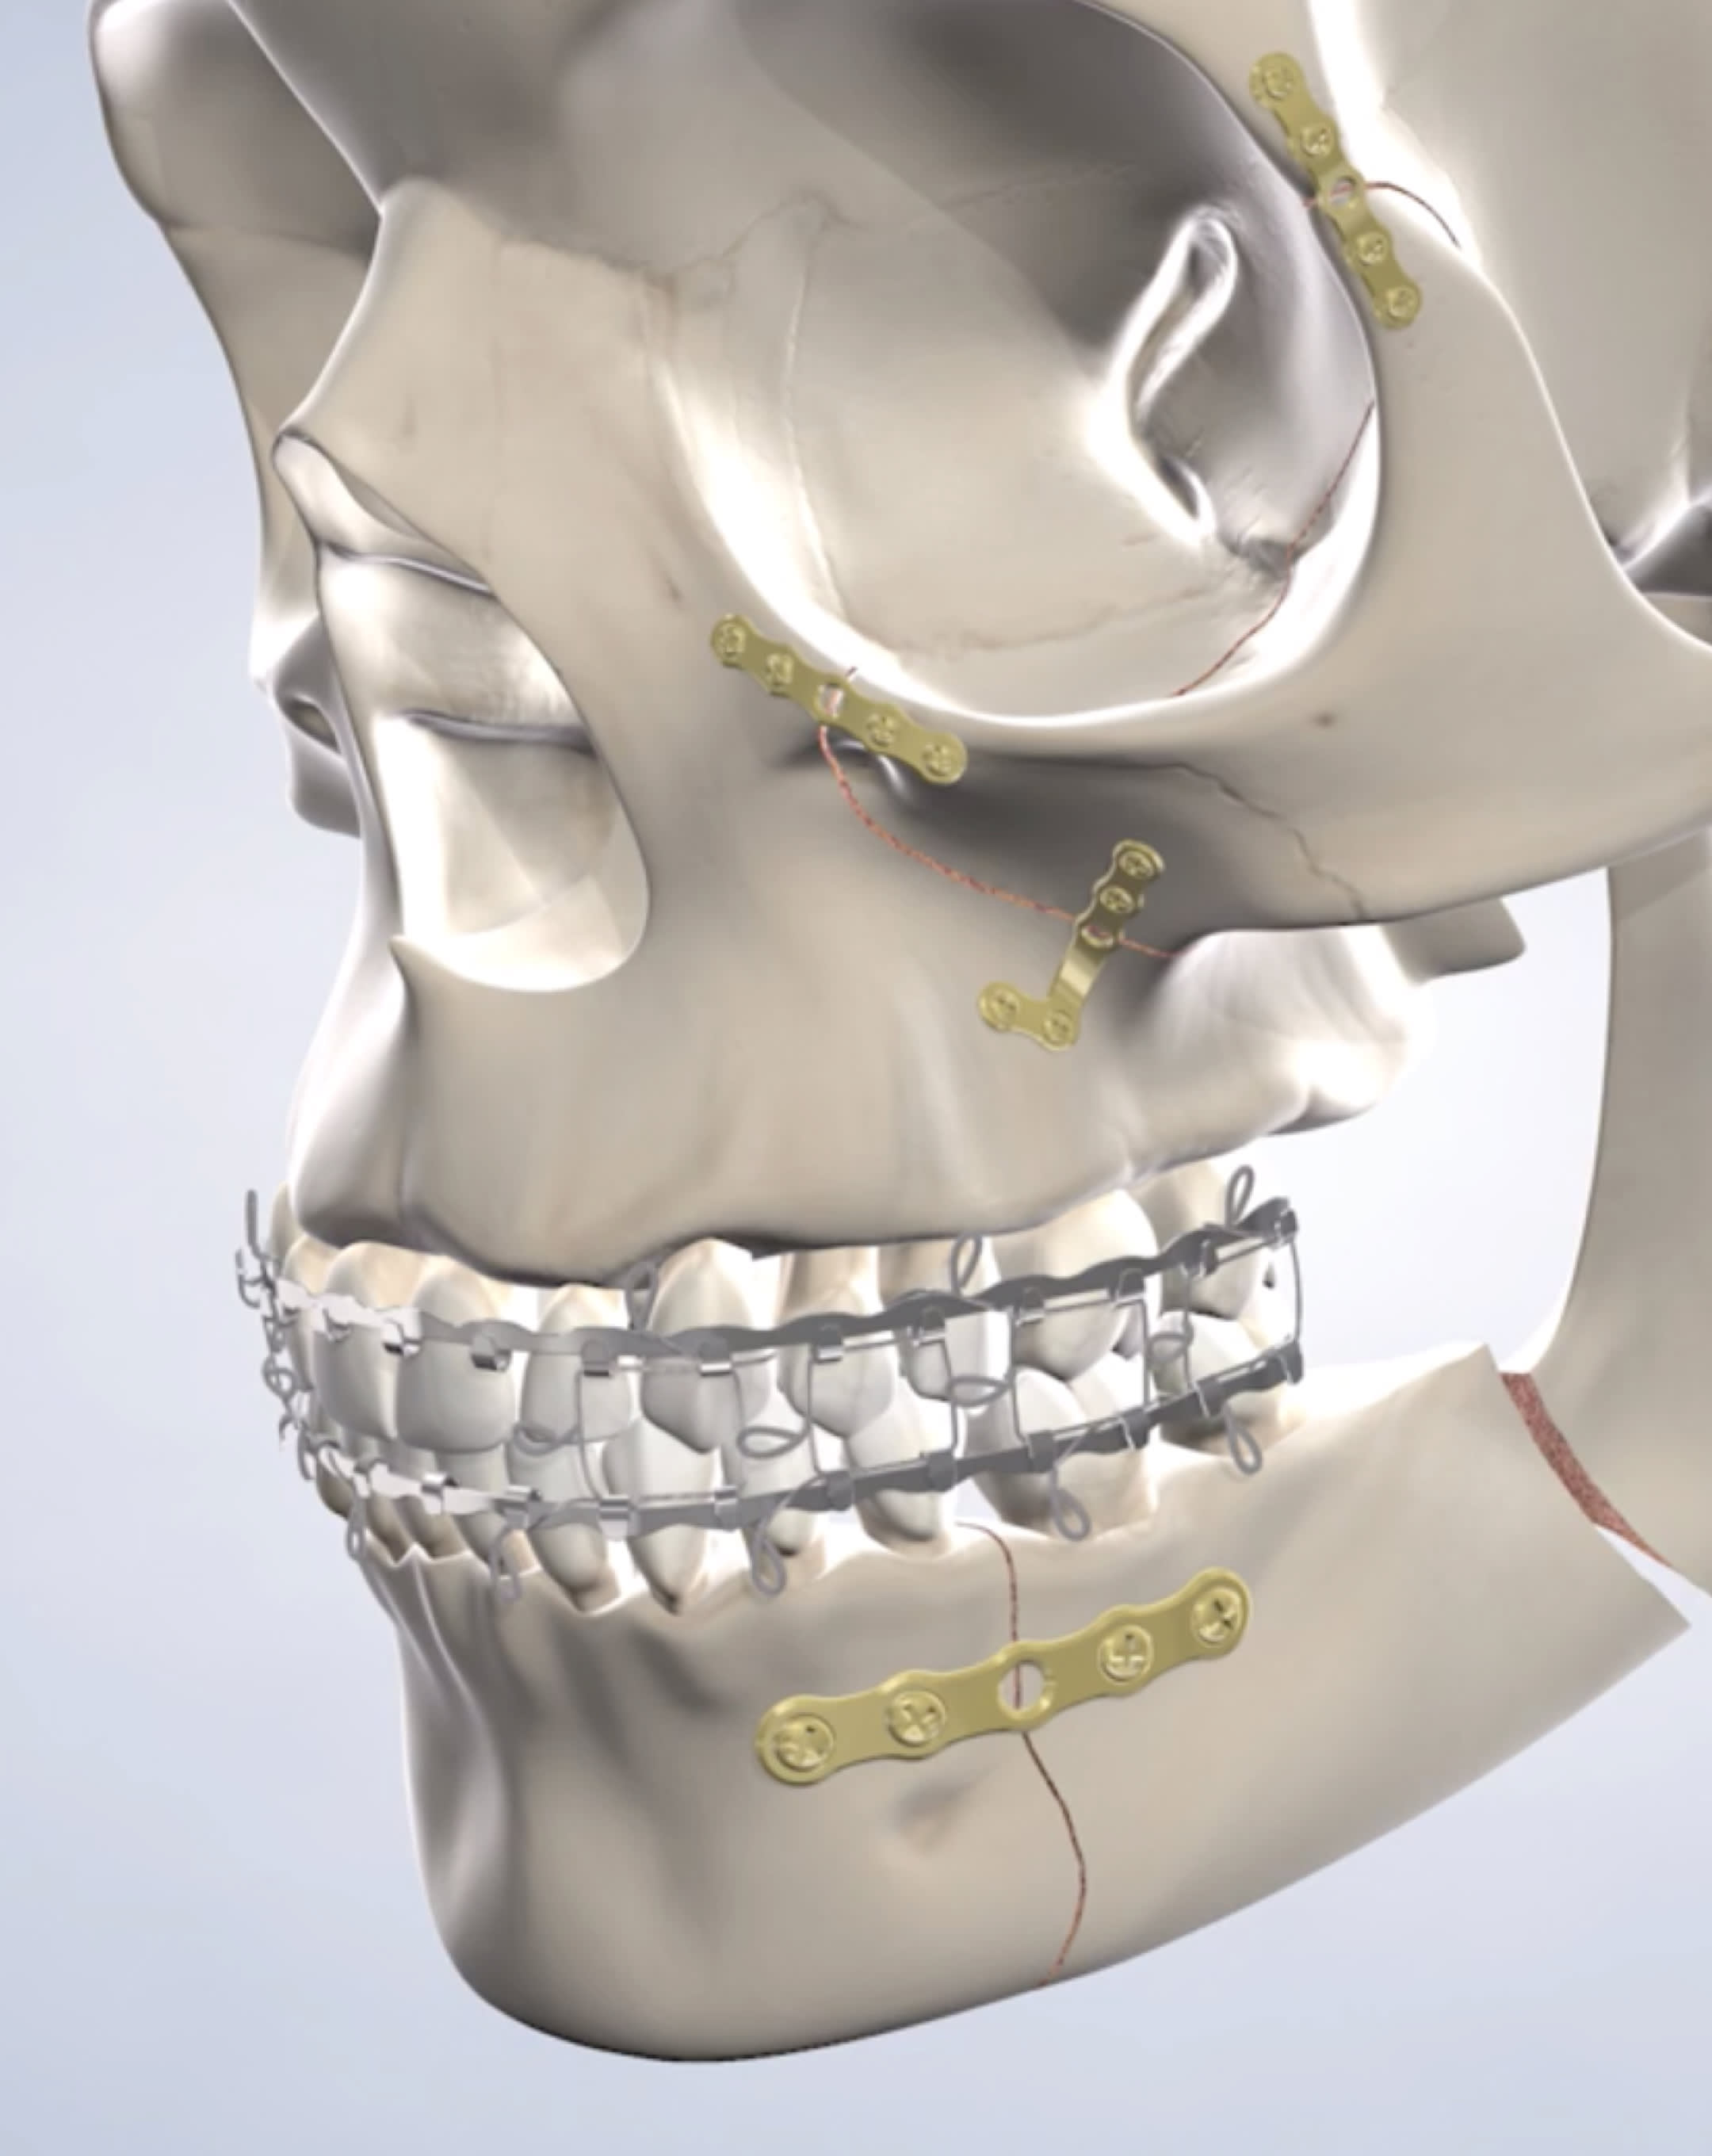 Metal holding face and teeth in place.